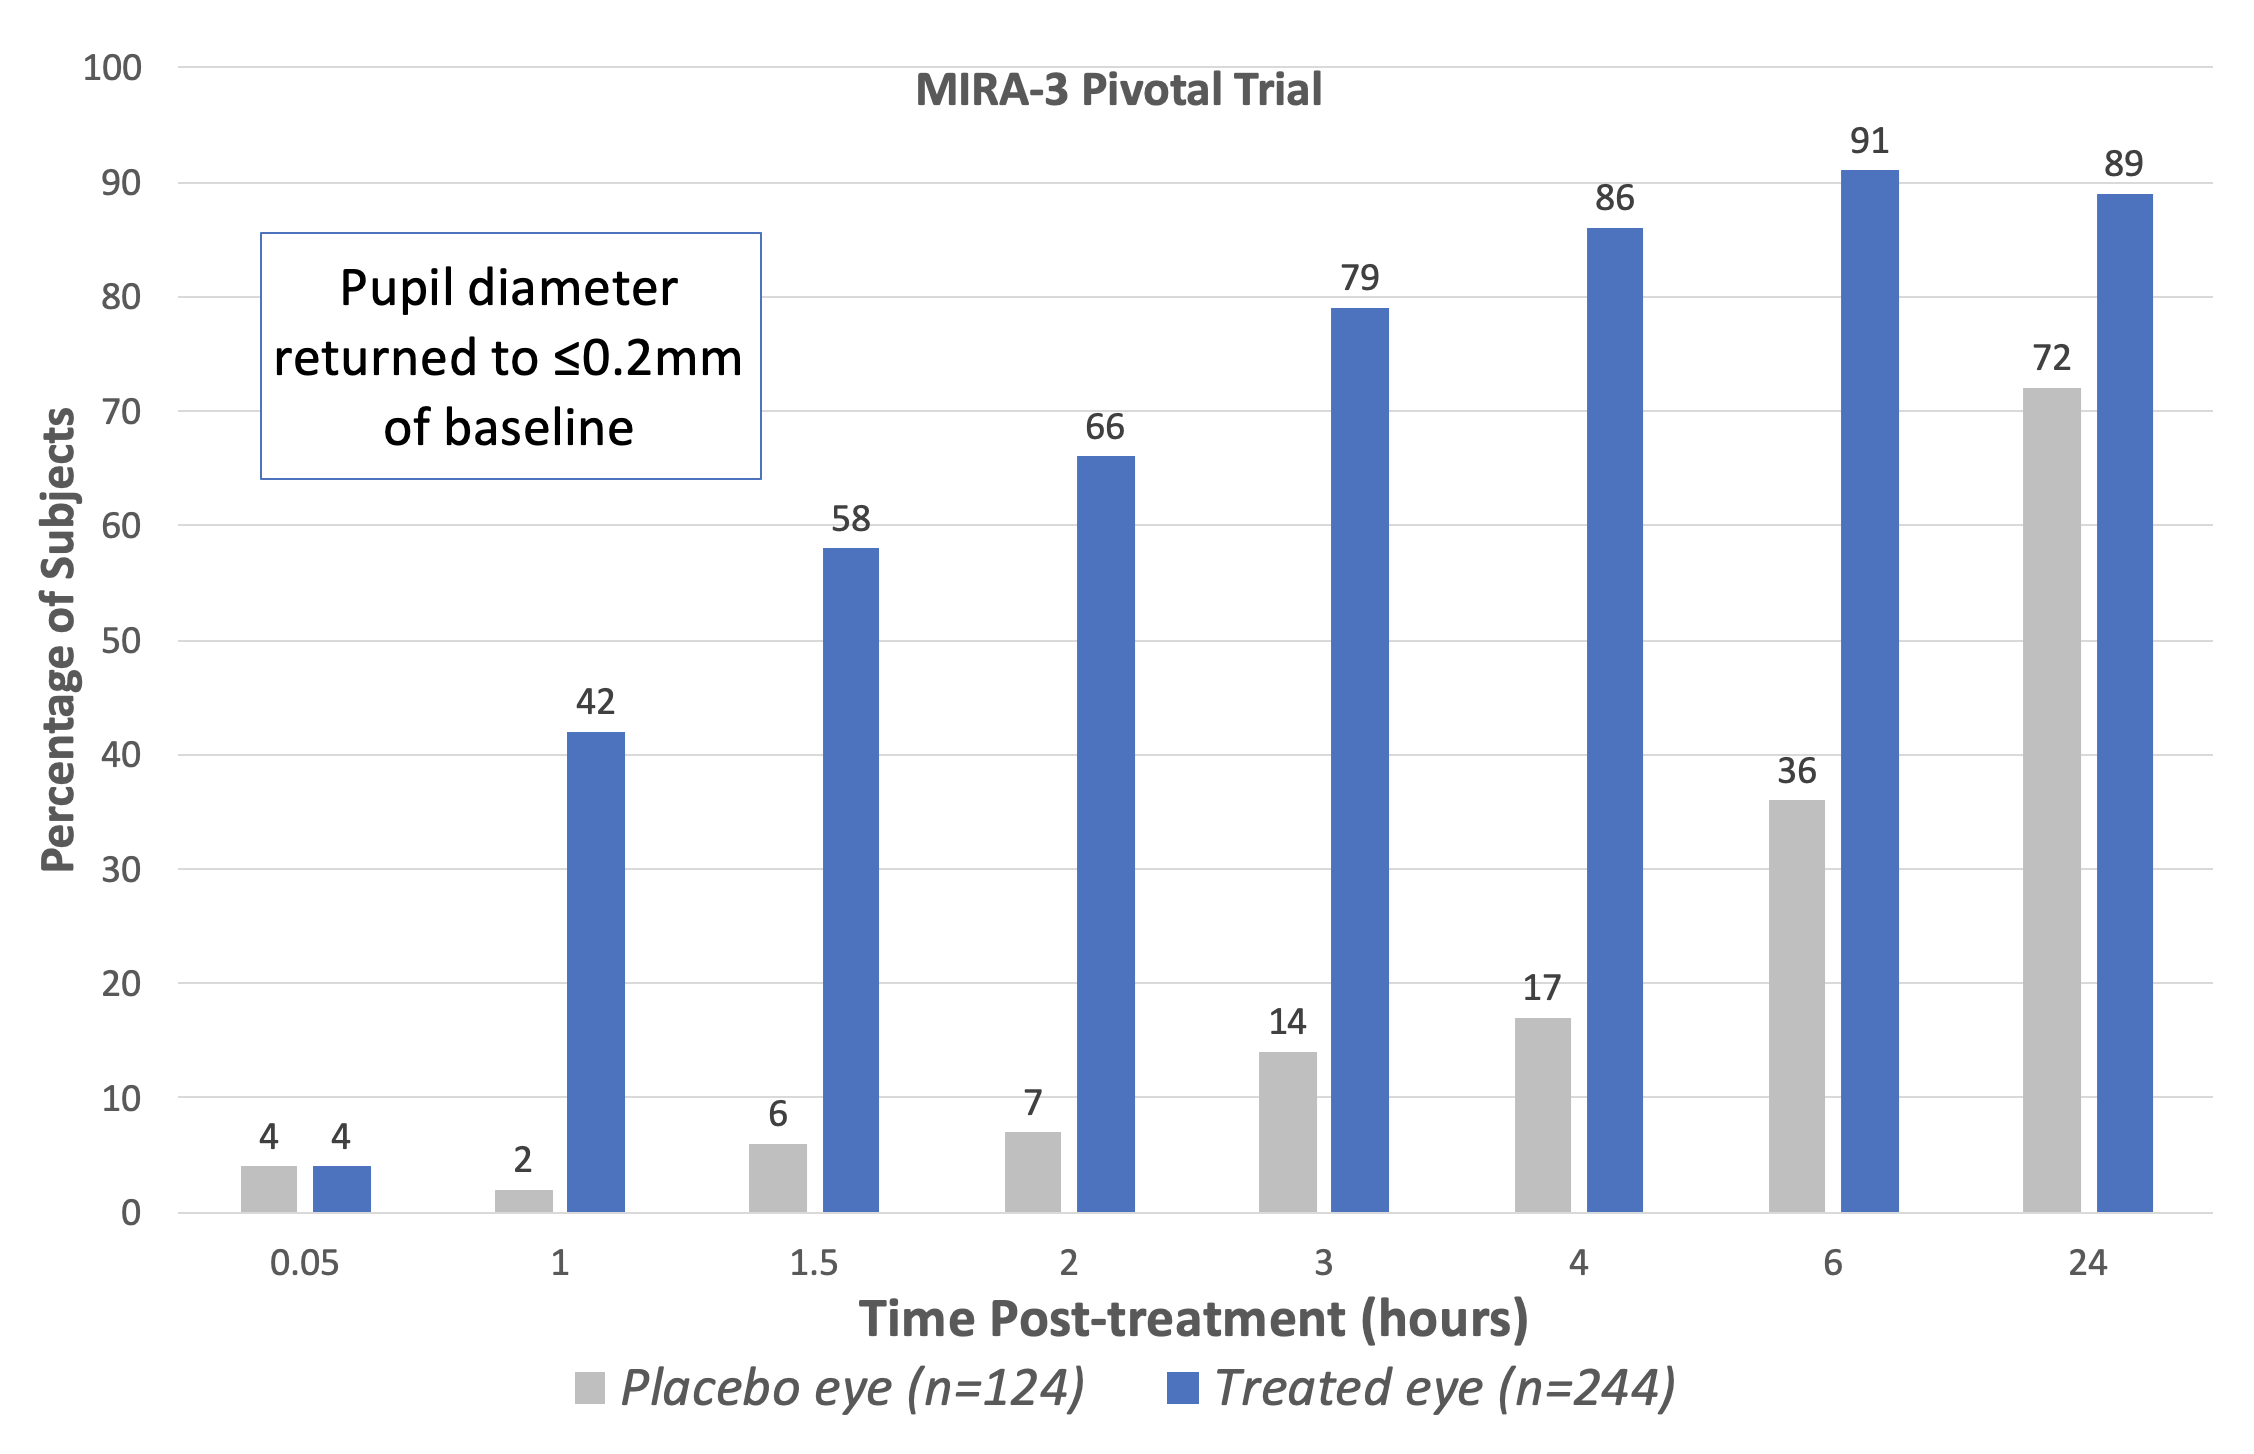 The Phase III pivotal trials (MIRA-2 and MIRA-3) showed that treatment with Ryzumvi restored pupils to pre-dilated status faster than untreated subjects. (Adapted from Prescribing Information statement; data for fellow eye treatment omitted.) 